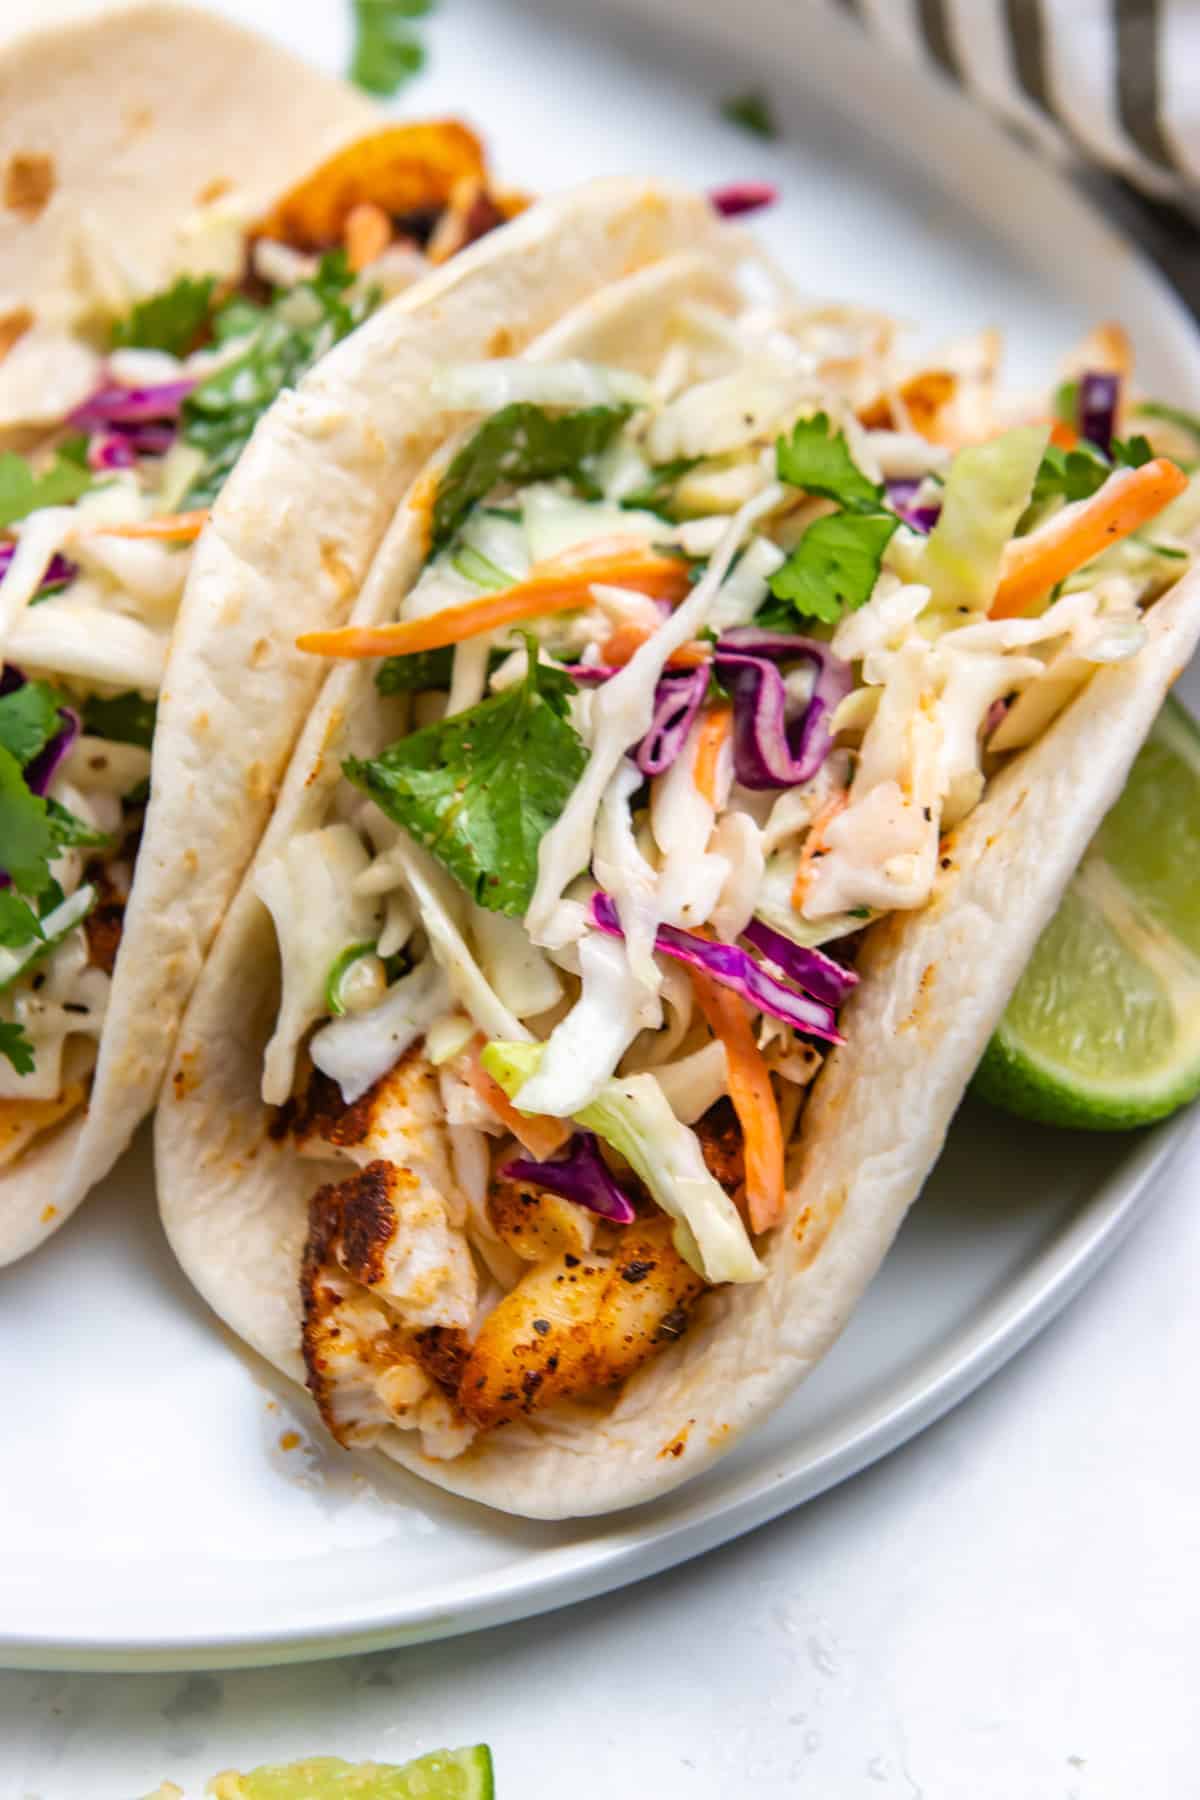 15 minute air fryer fish tacos with cilantro lime slaw